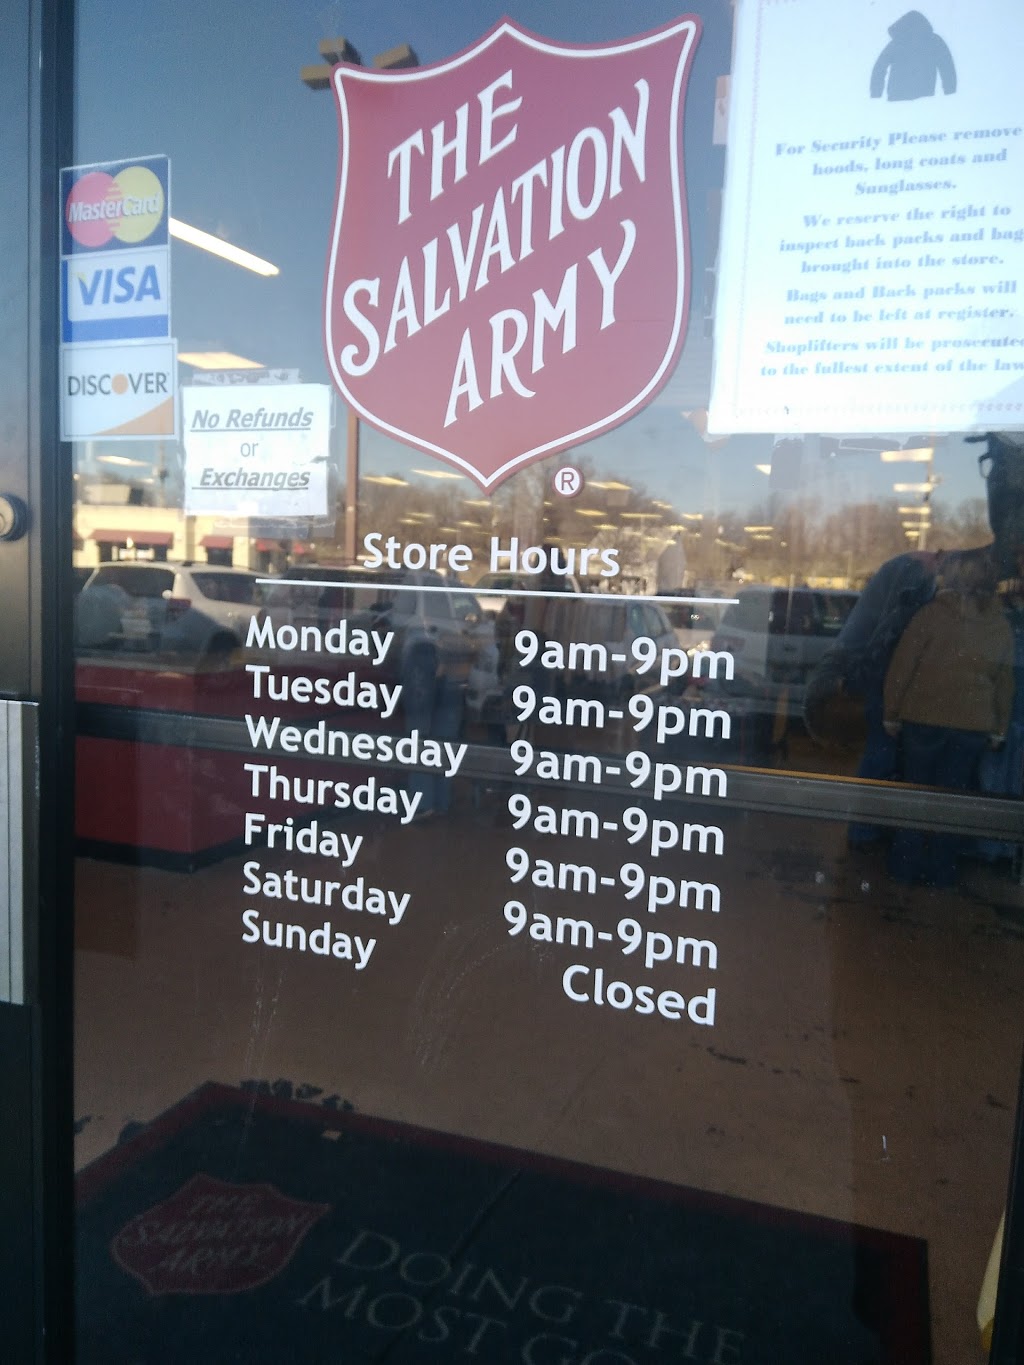 The Salvation Army Family Store & Donation Center | 1601 W 23rd St, Lawrence, KS 66046 | Phone: (785) 856-1115